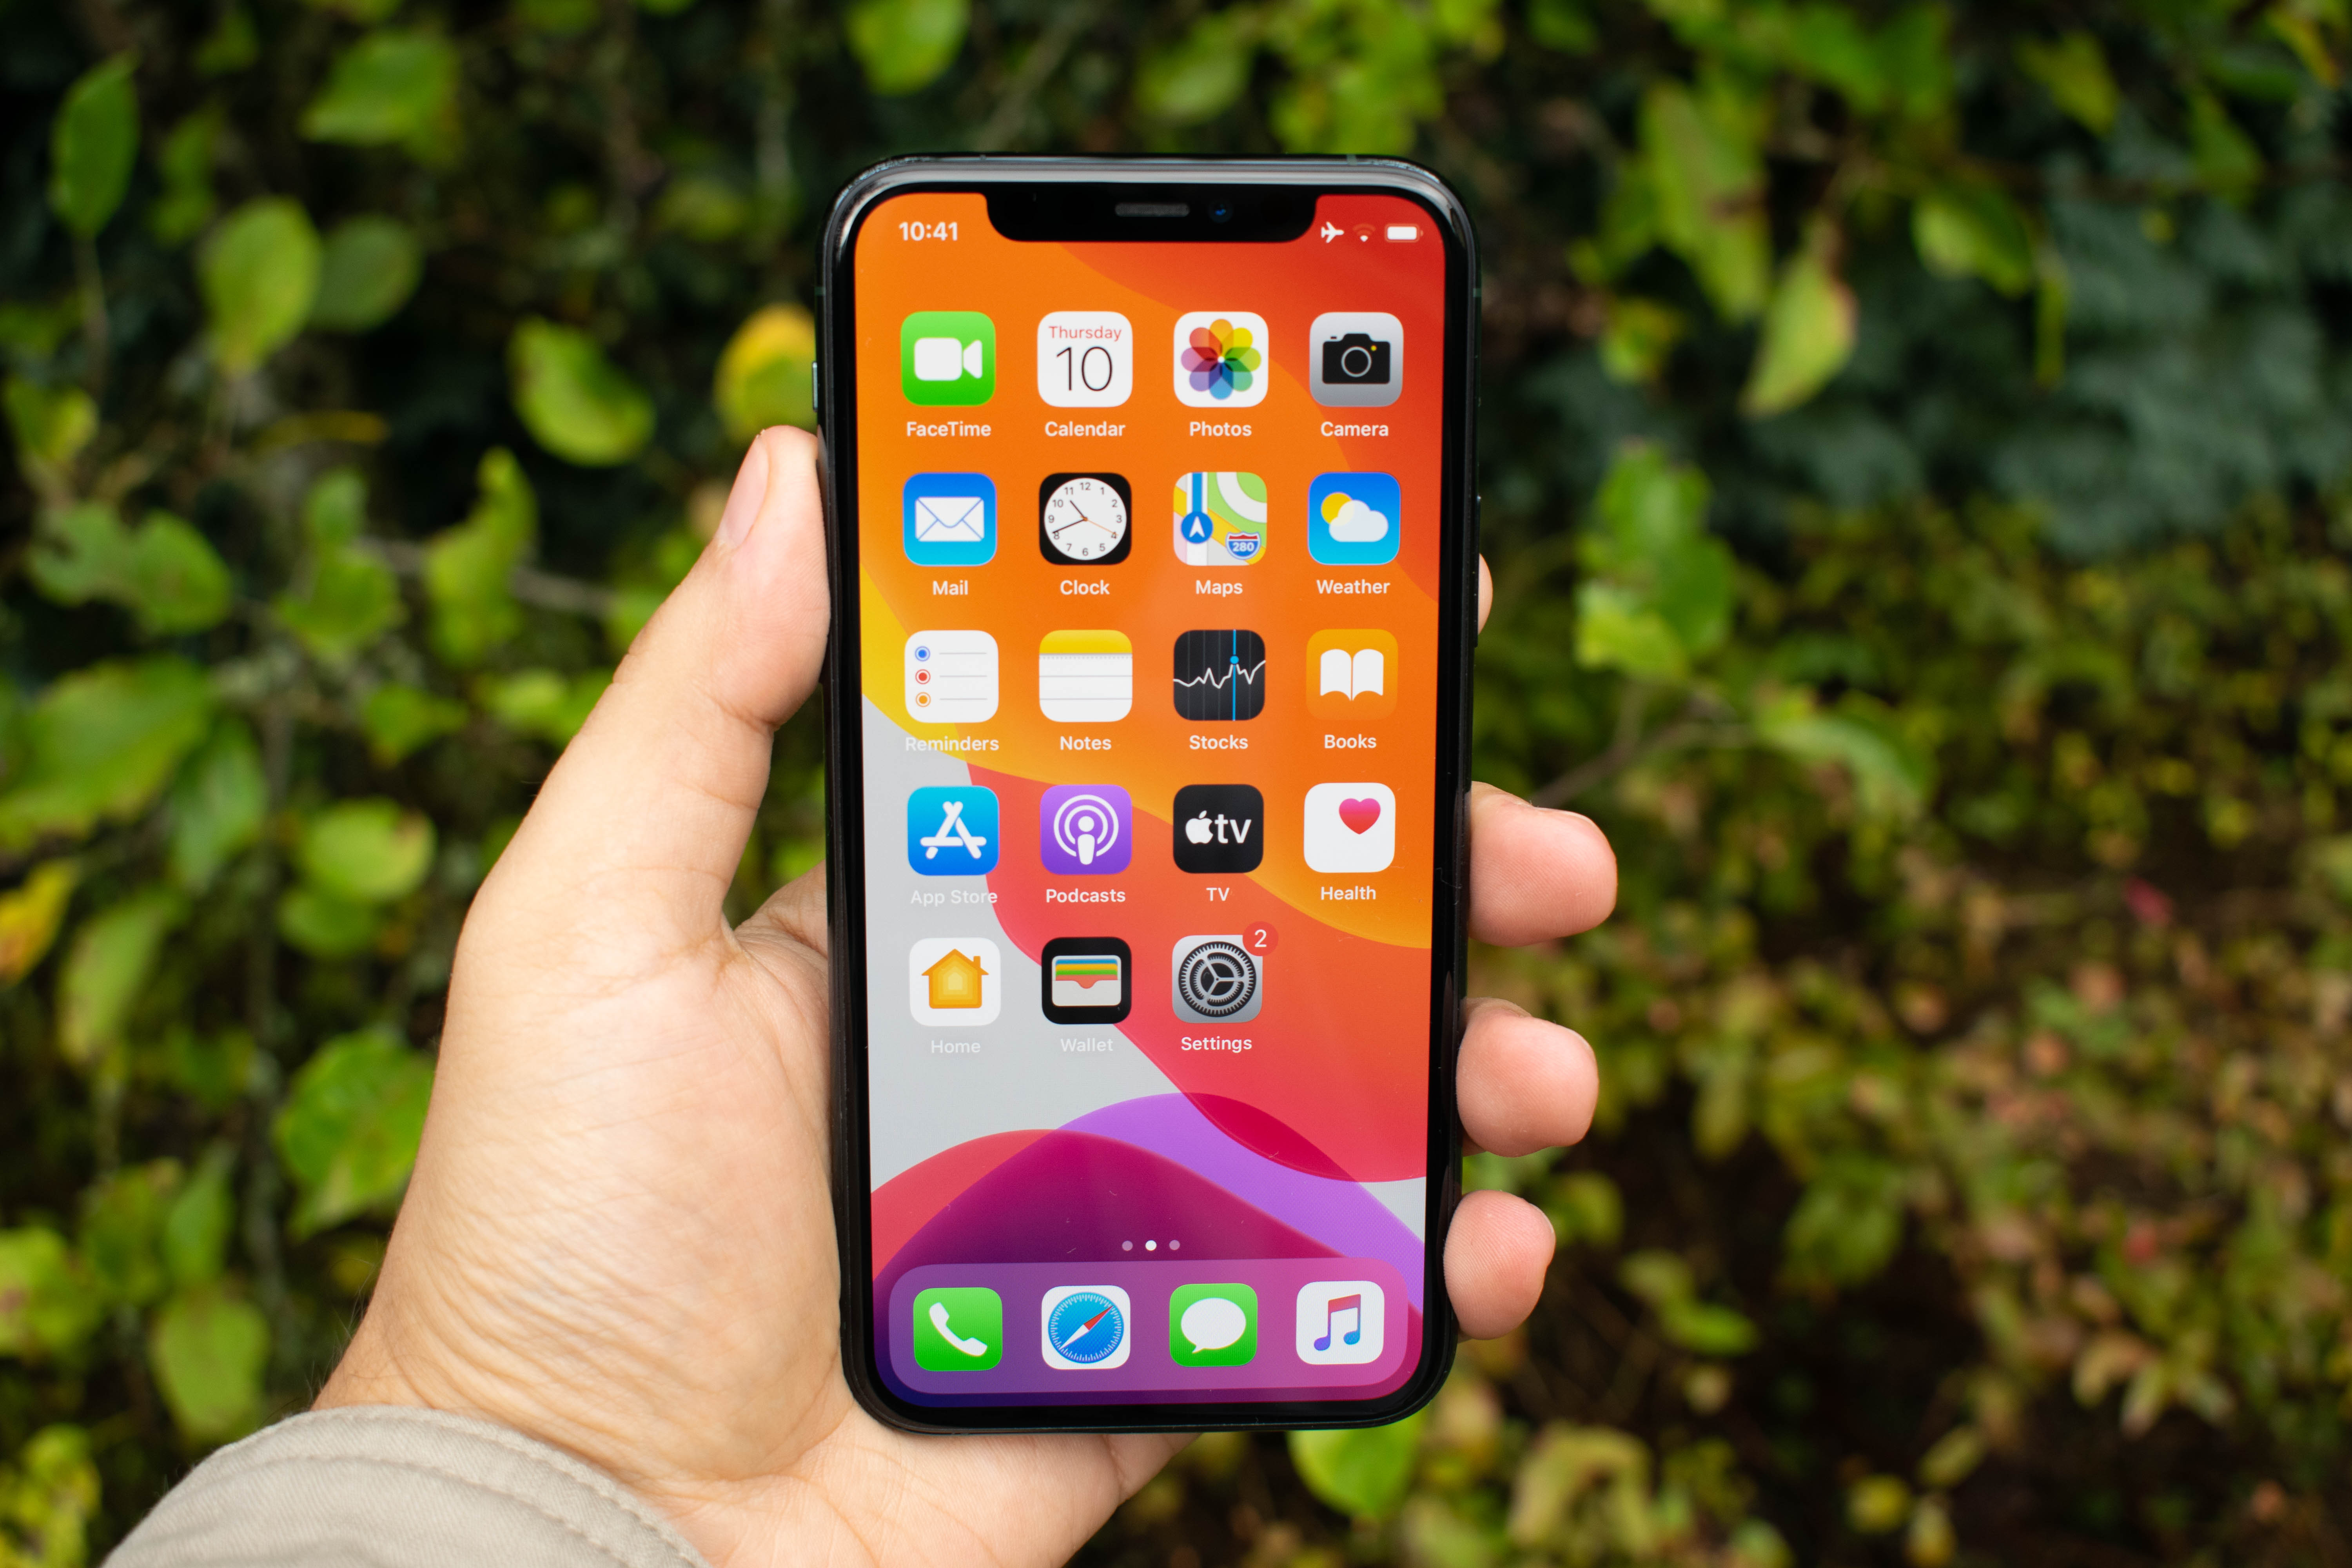 Display Measurement Power The Apple Iphone 11 11 Pro 11 Pro Max Review Performance Battery Camera Elevated